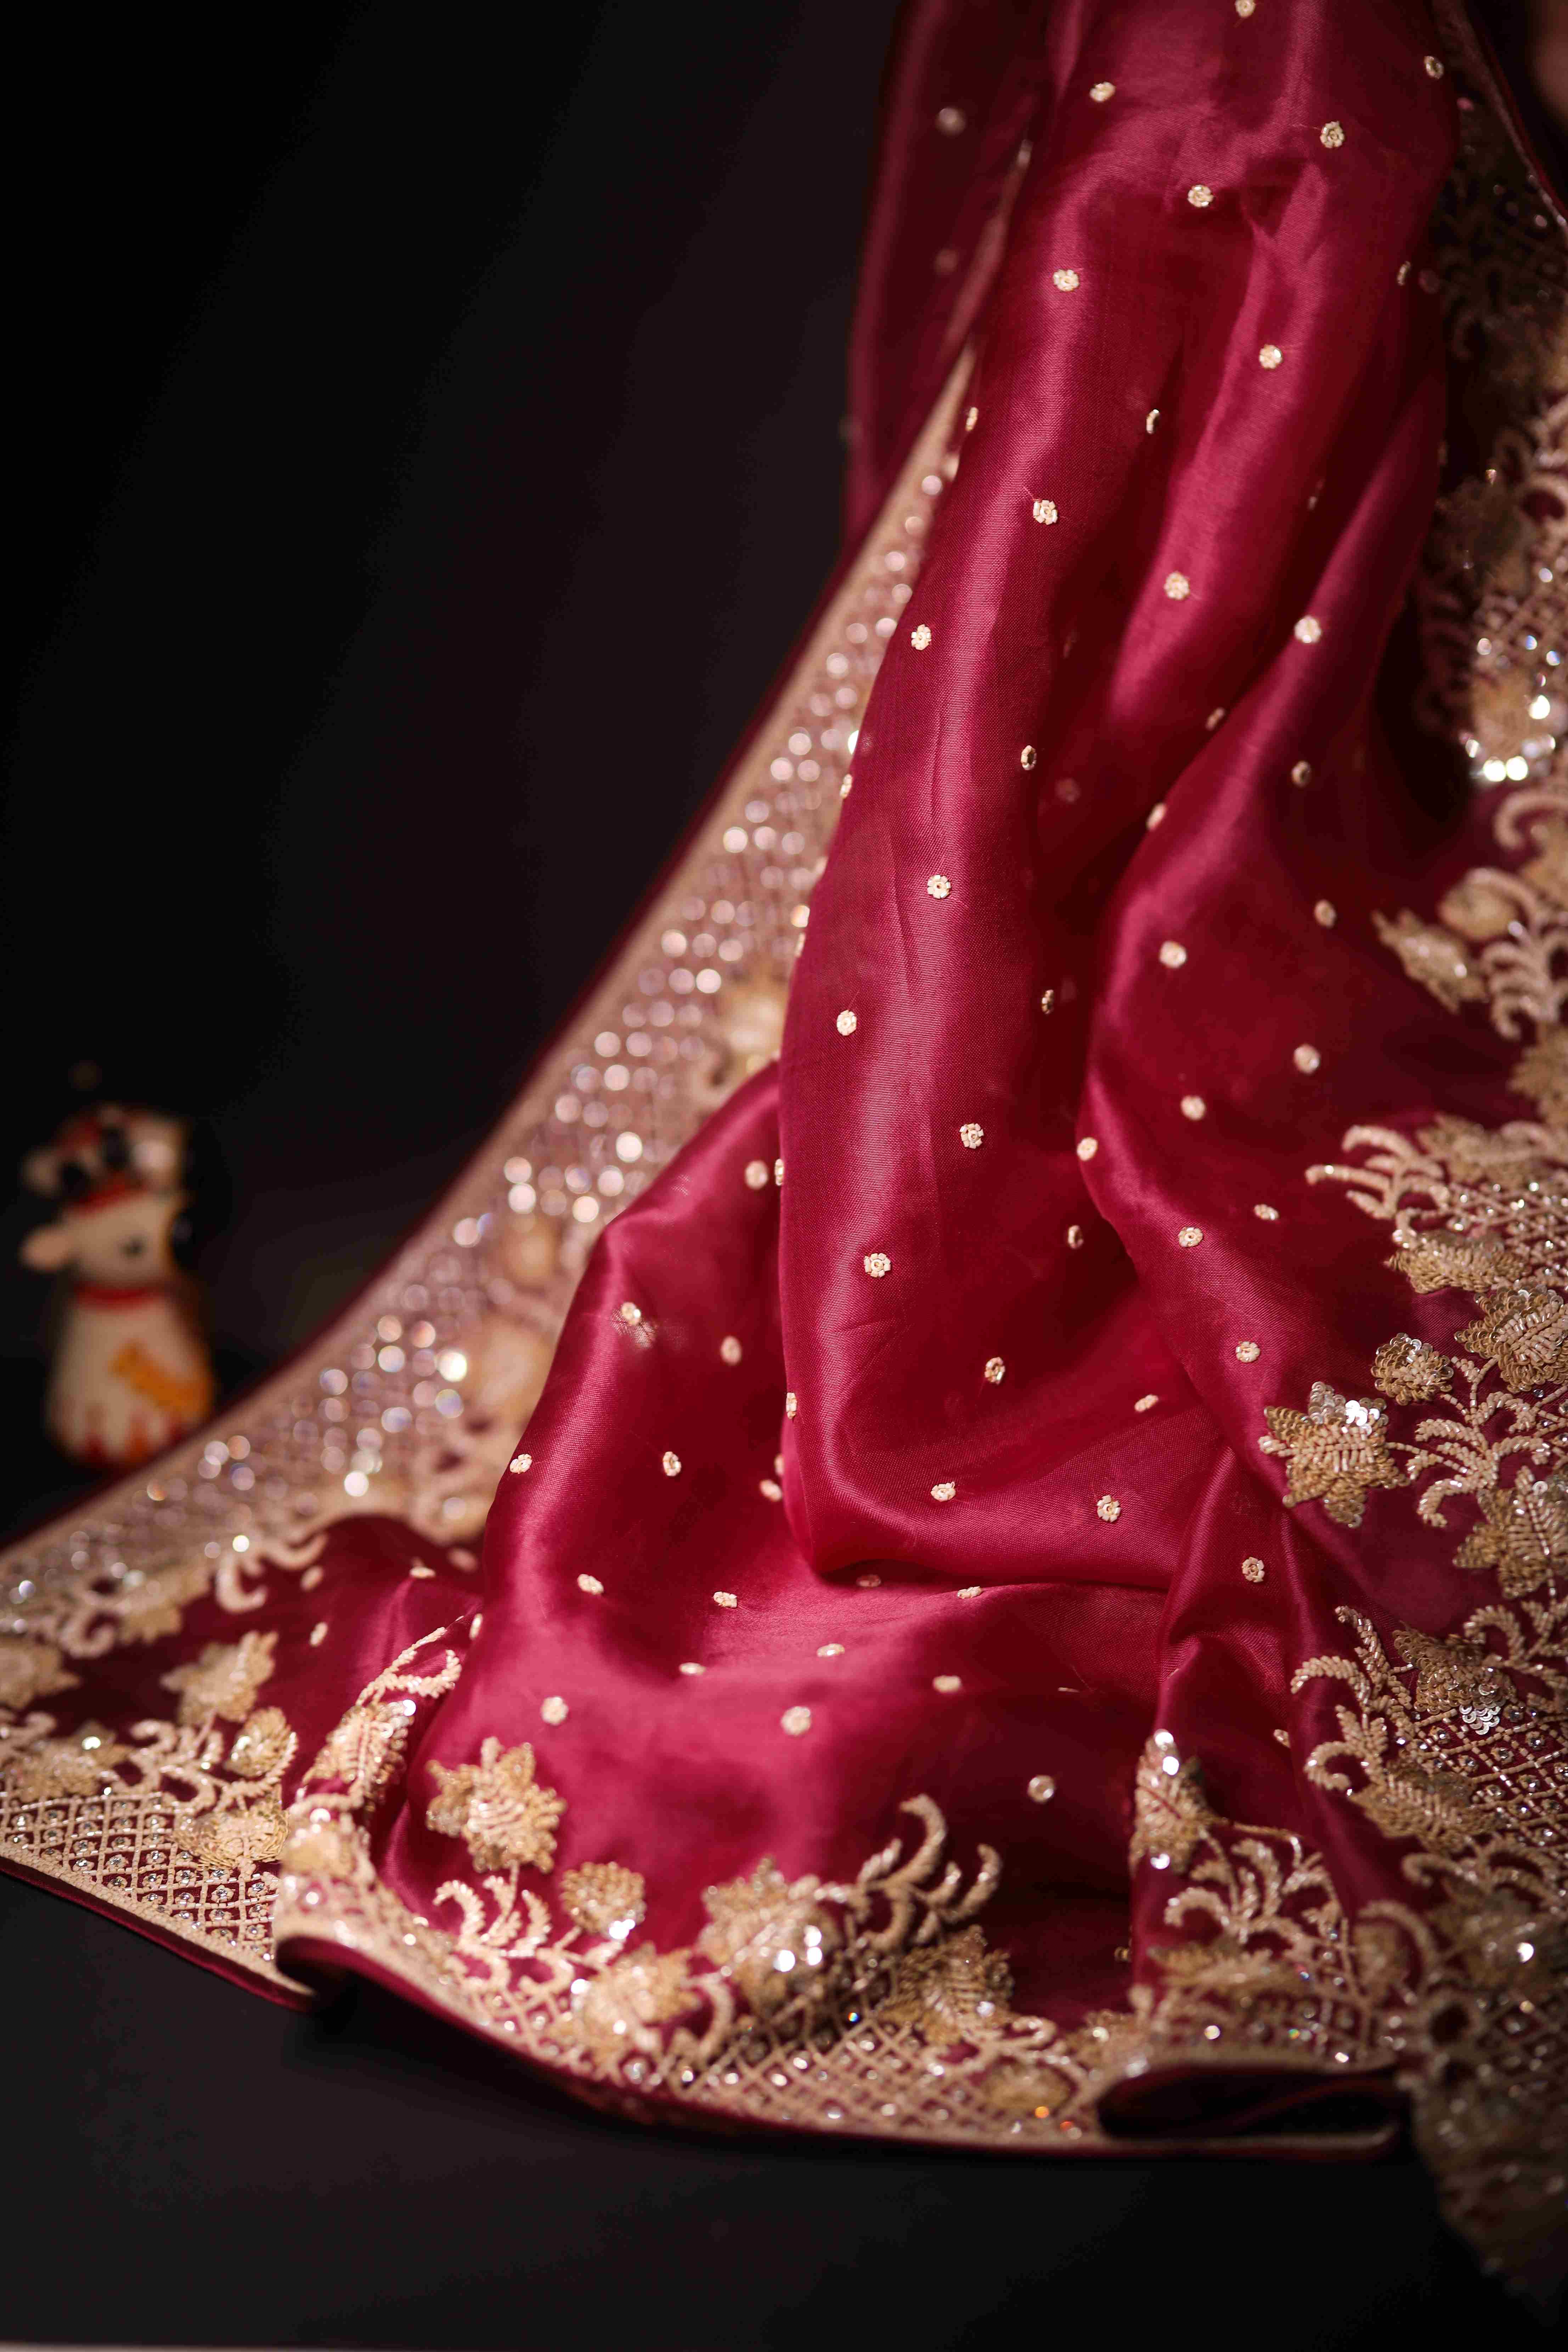 Experience The Beauty Of Heritage Handlooms At Singhania’s